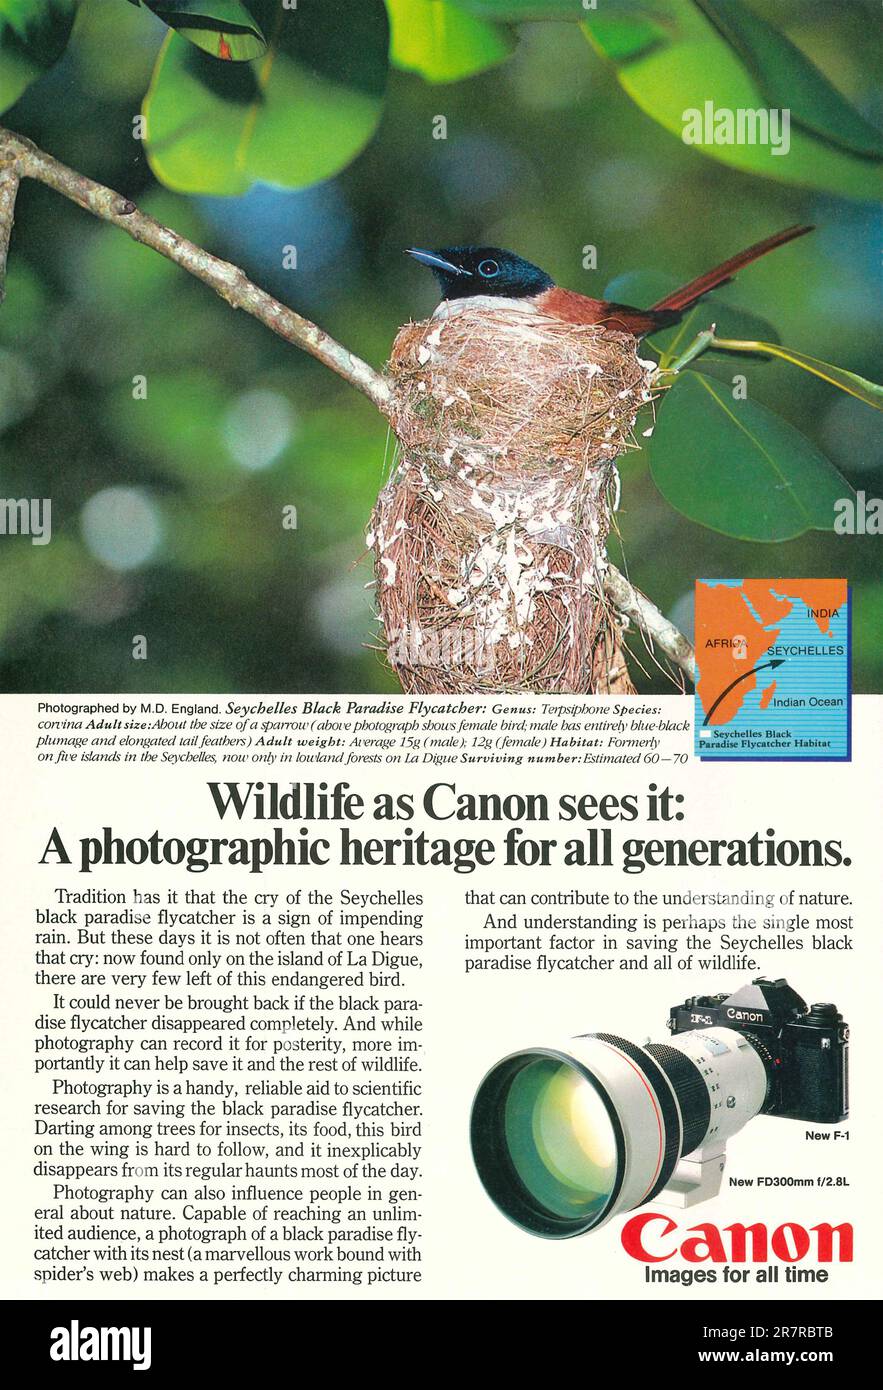 Canon photo camera long-lens, 300 mm advert in a magazine 1982. Stock Photo